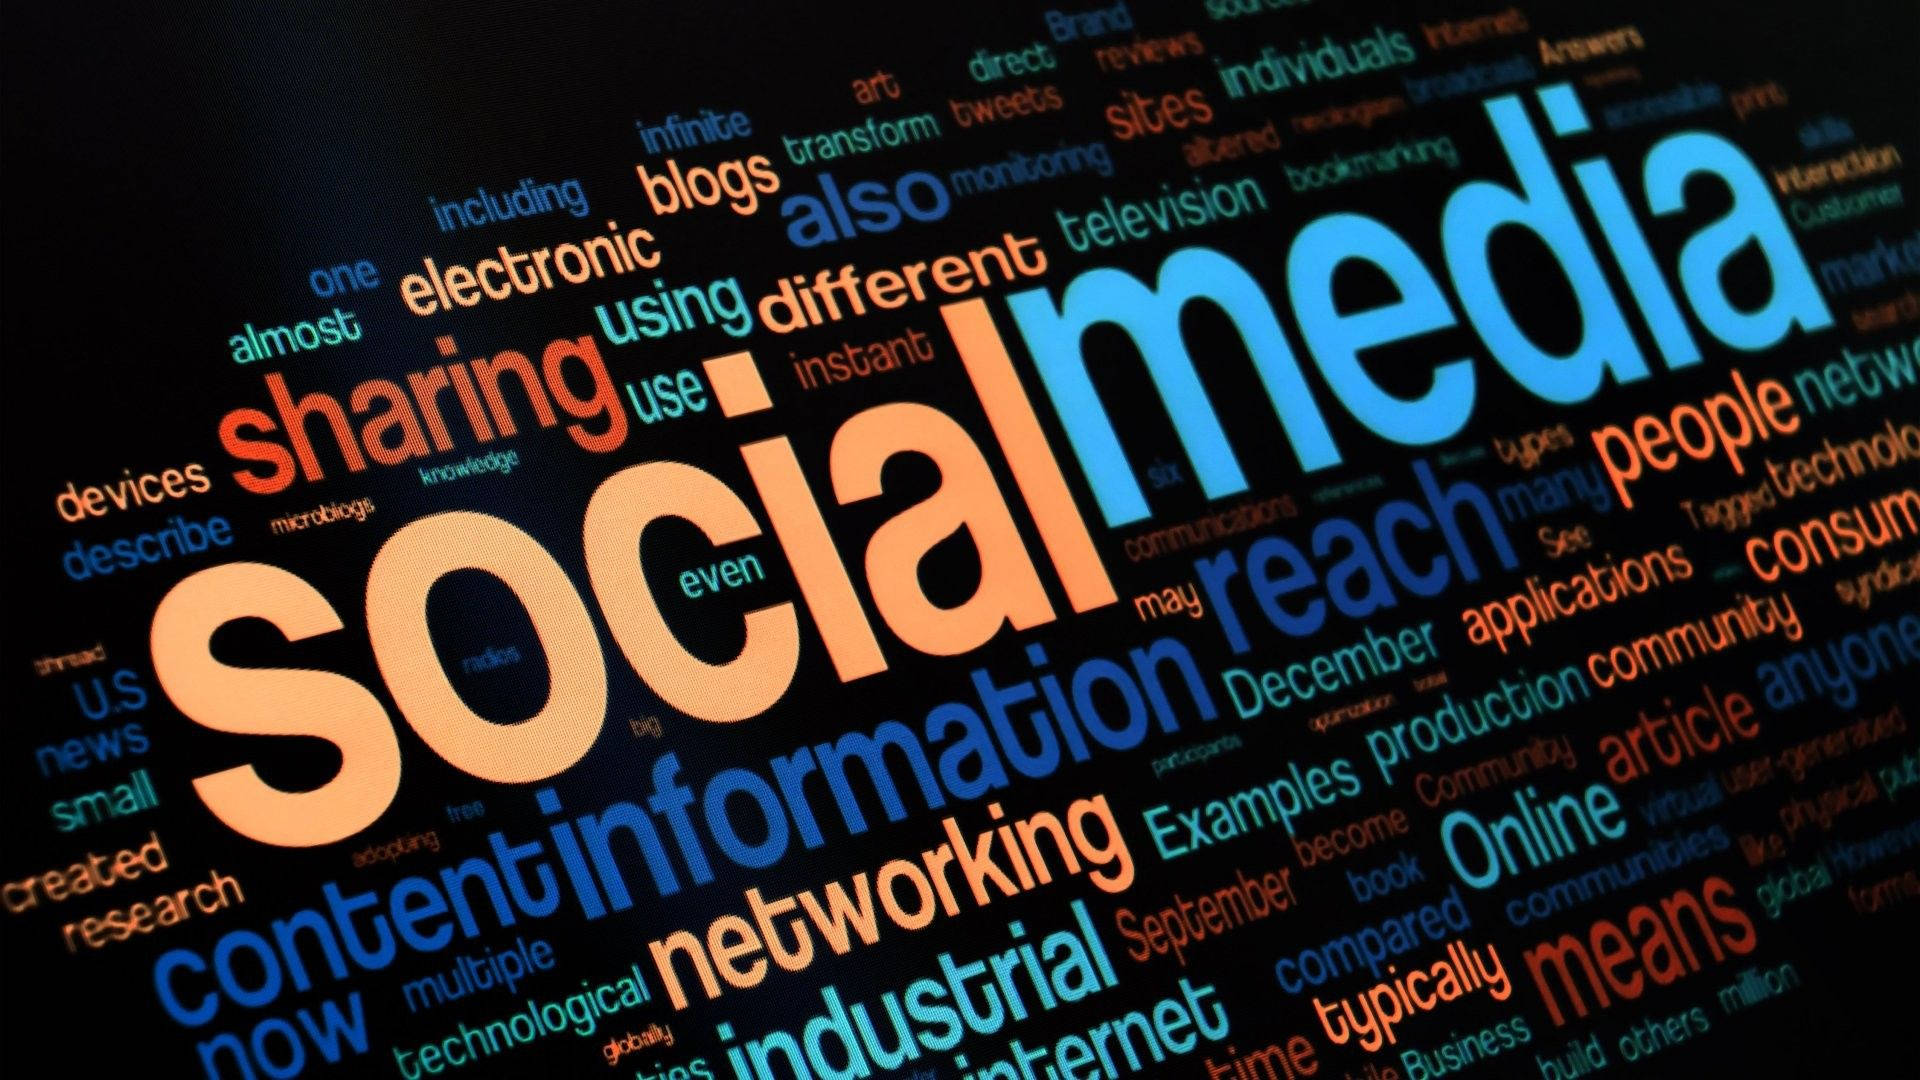 A Powerful Network Of Social Media Words